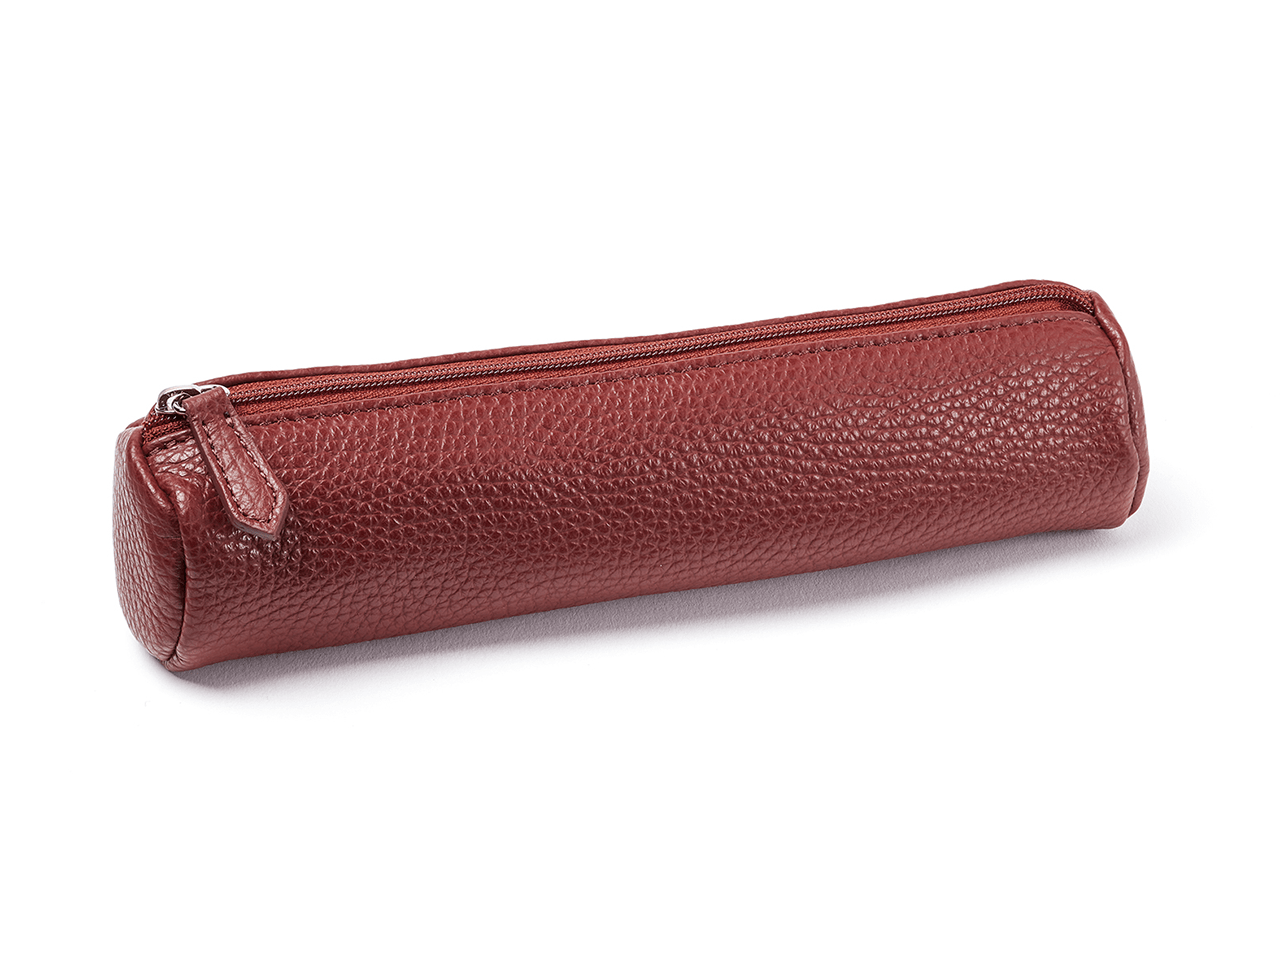 Fabriano Large Octane Leather Pencil Case